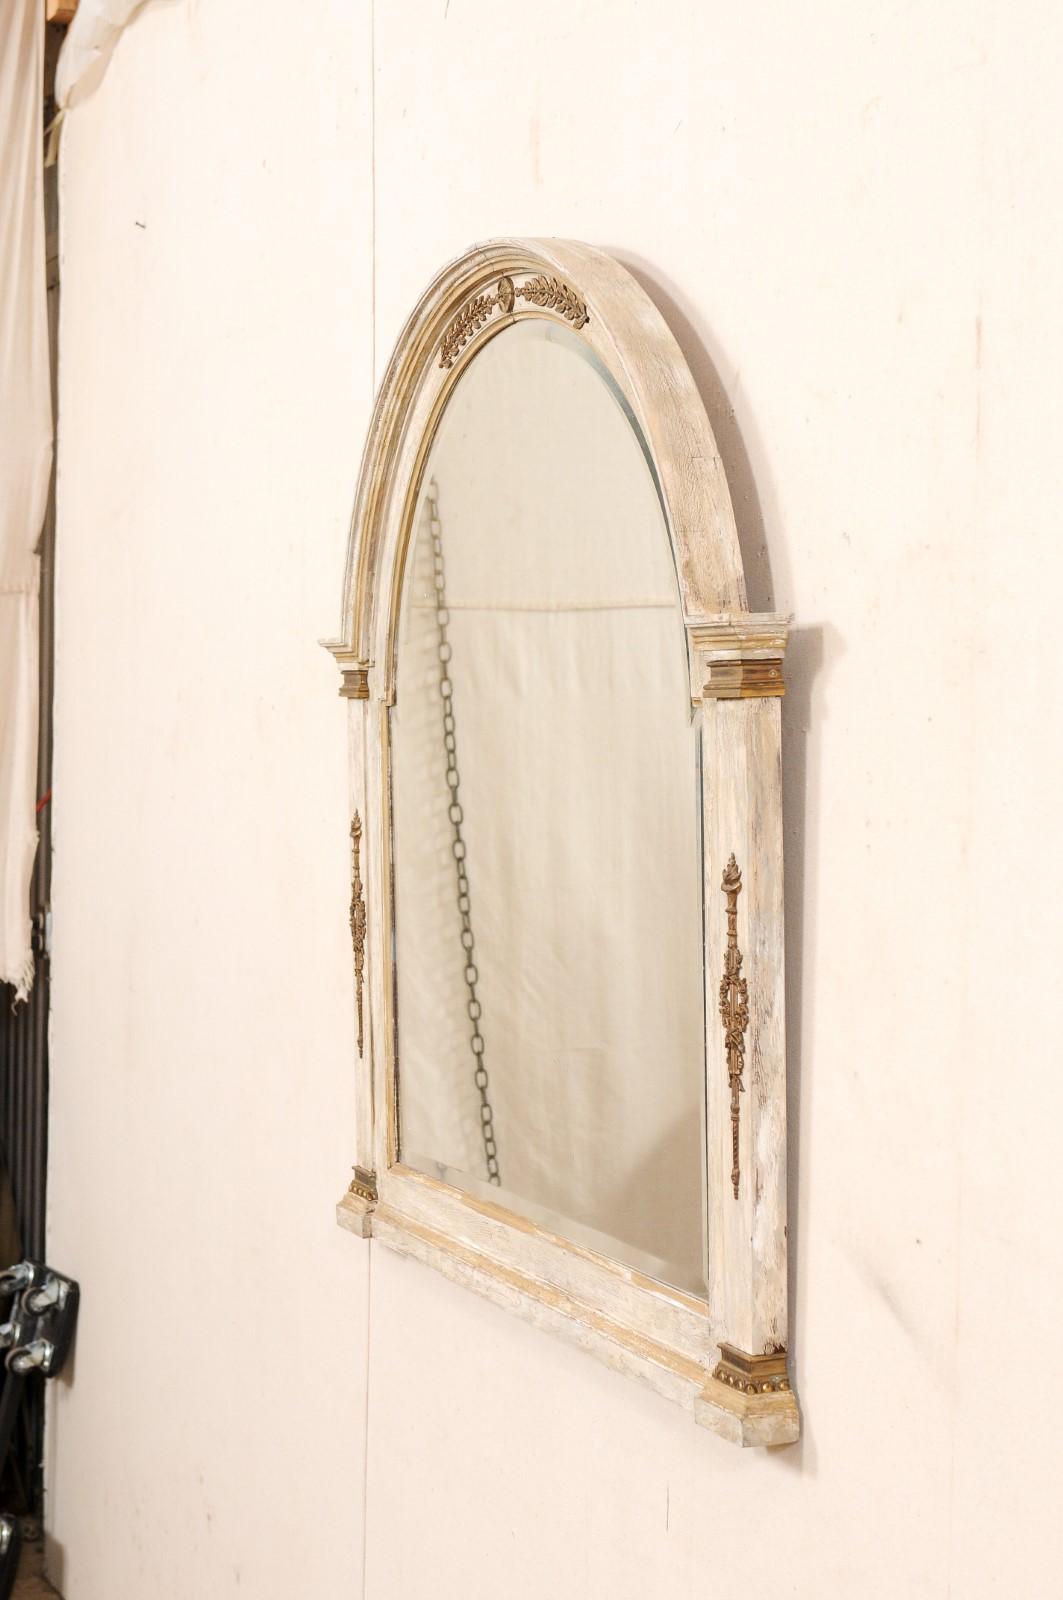 Early 20th C. French Painted Wood Mirror, Arched with Column Sides (3.5 Ft Tall) For Sale 1